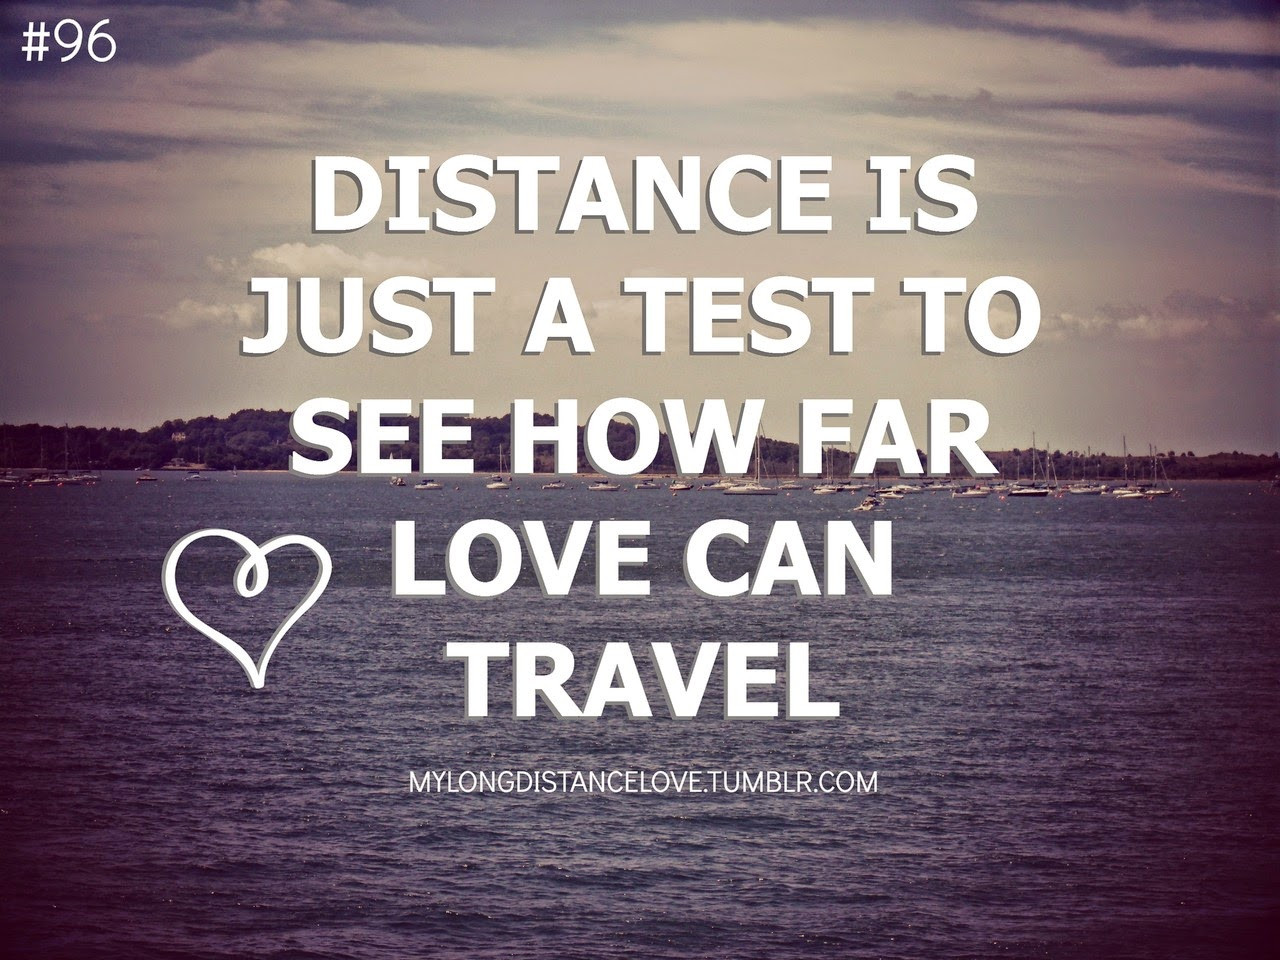 Quotes About Long Distance Love
 Long distance relationship quotes for her and for him